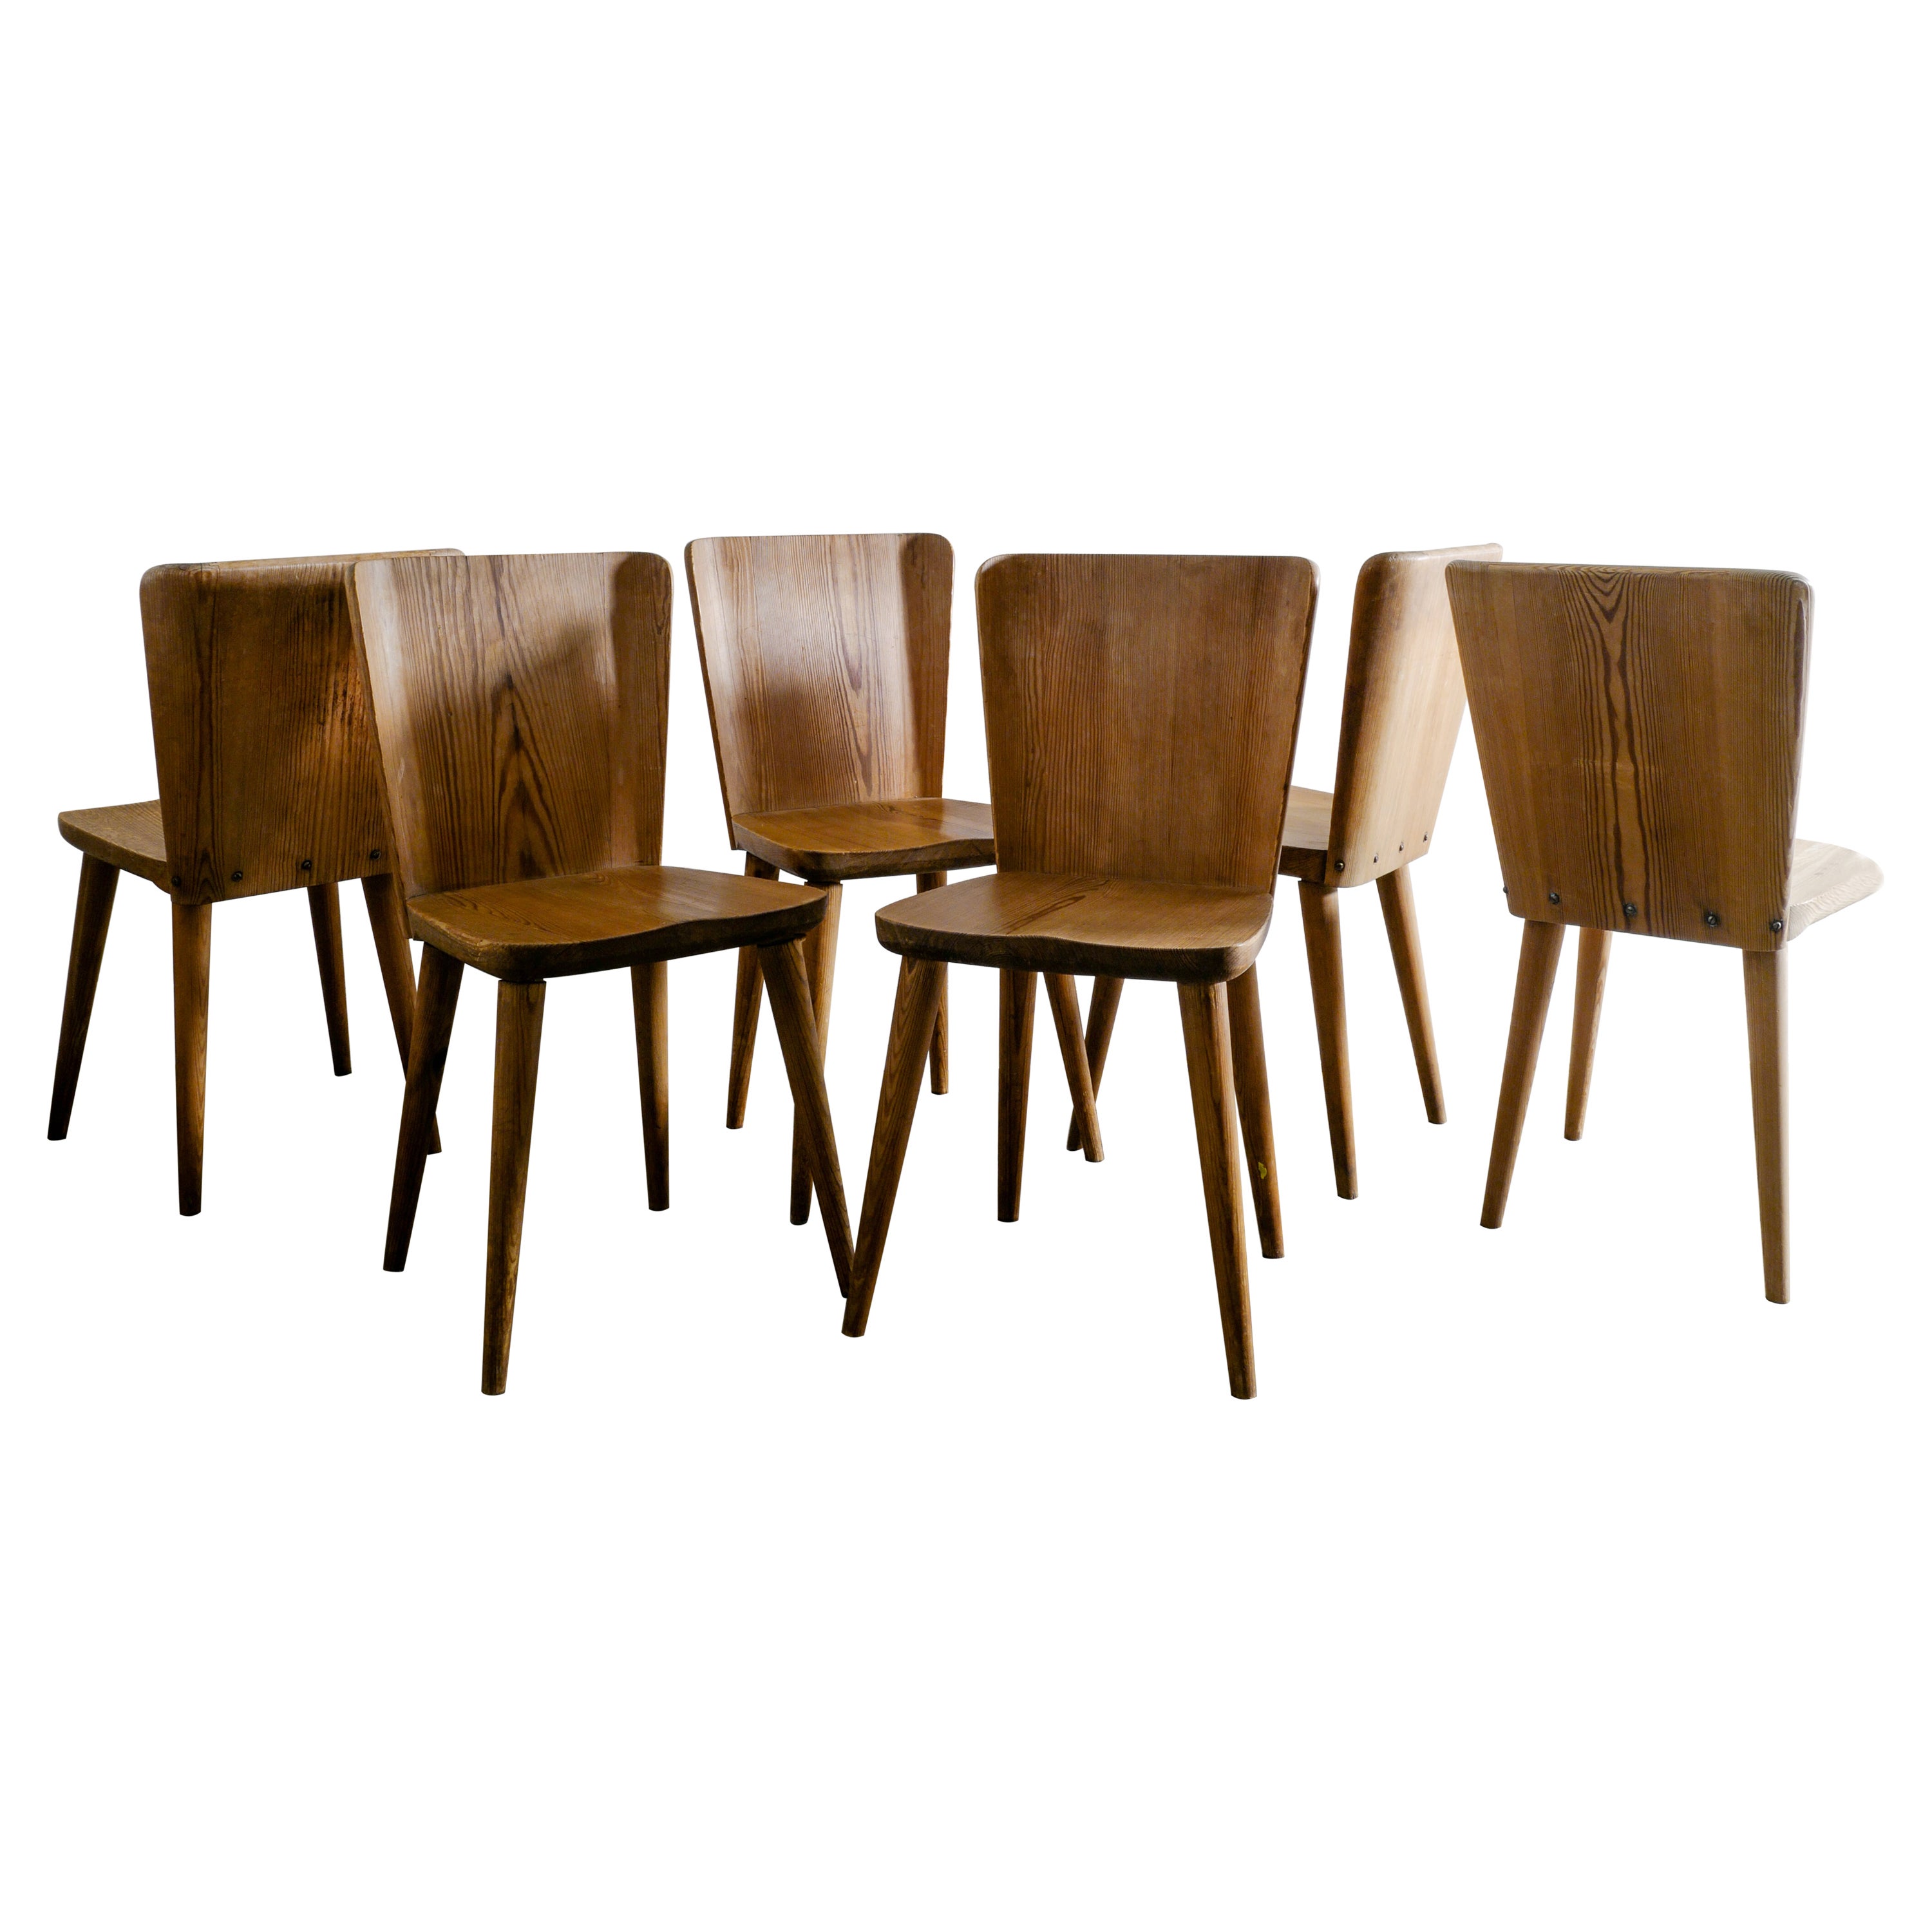 Set of Six Göran Malmvall Dining Chairs in Pine Produced in Sweden, 1940s